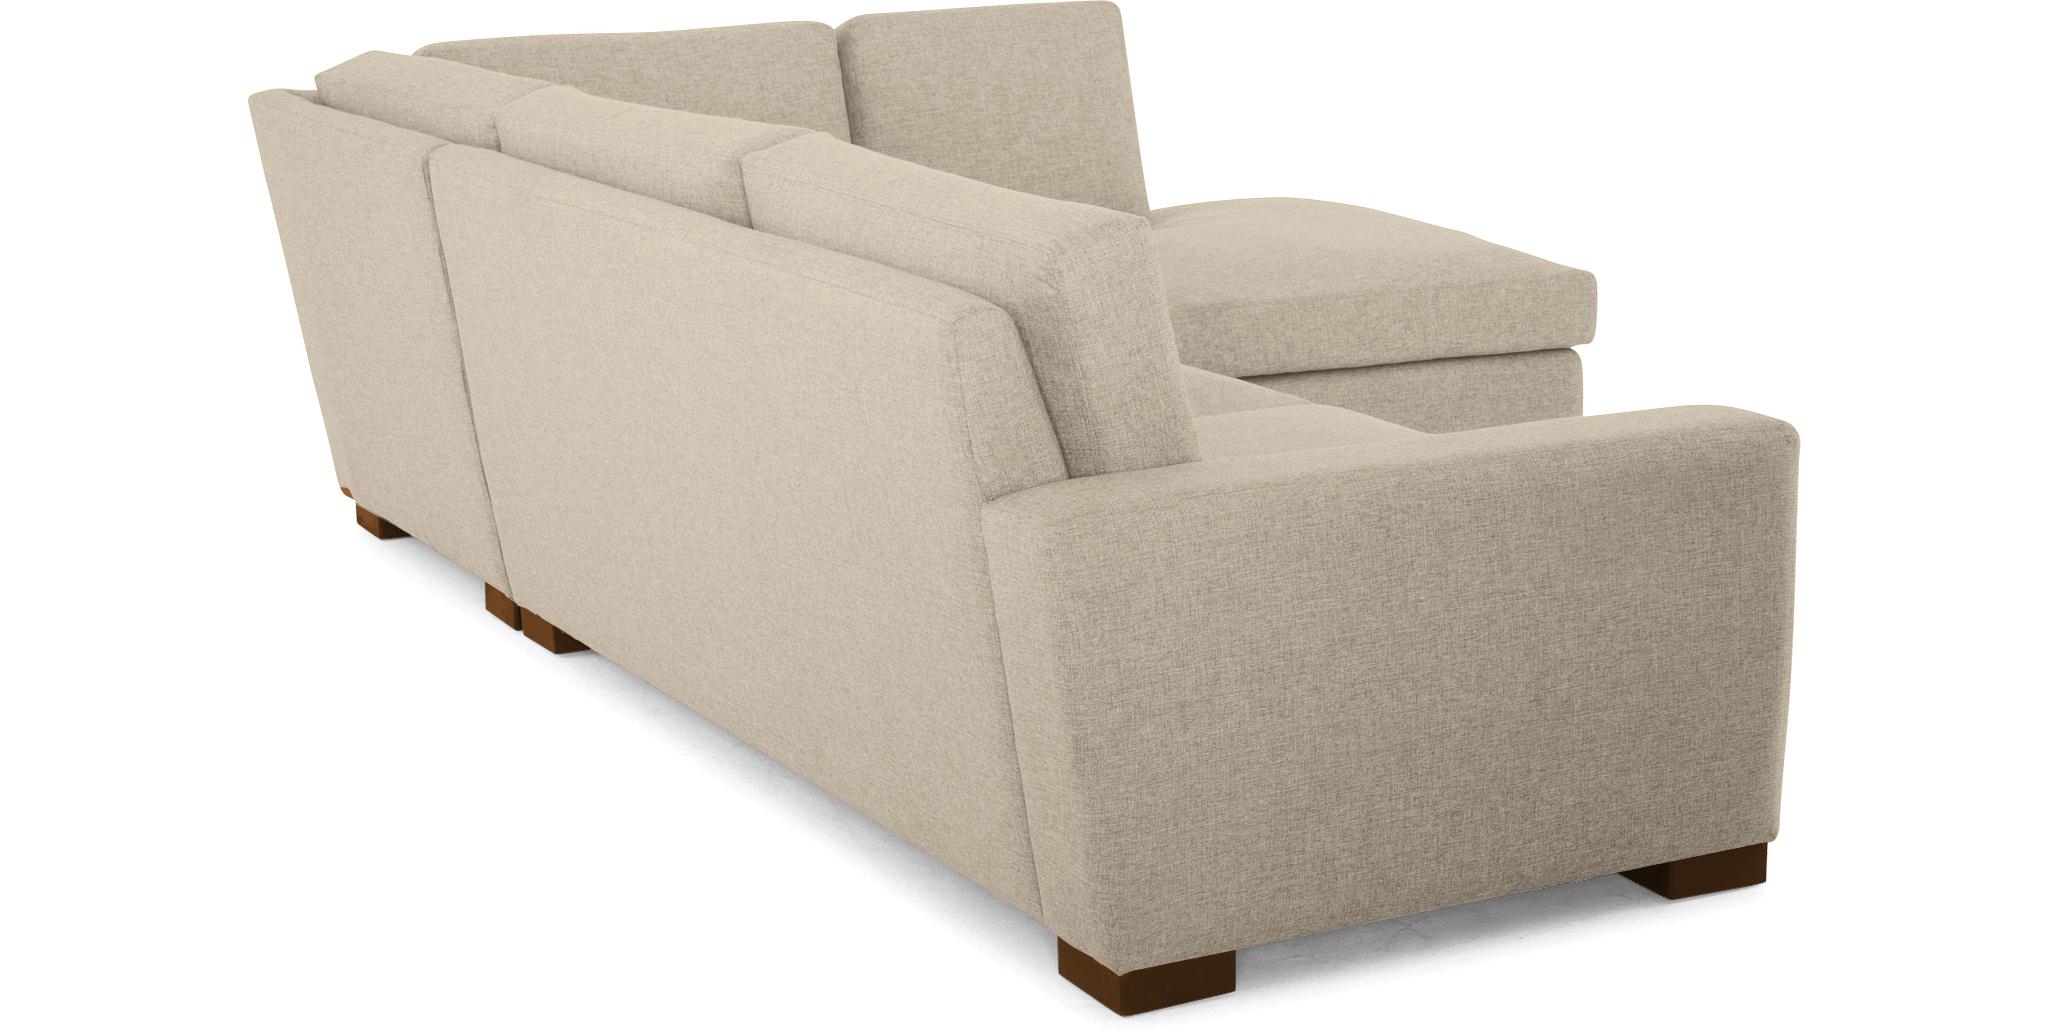 Beige/White Anton Mid Century Modern Sectional with Bumper - Cody Sandstone - Mocha - Right  - Image 3